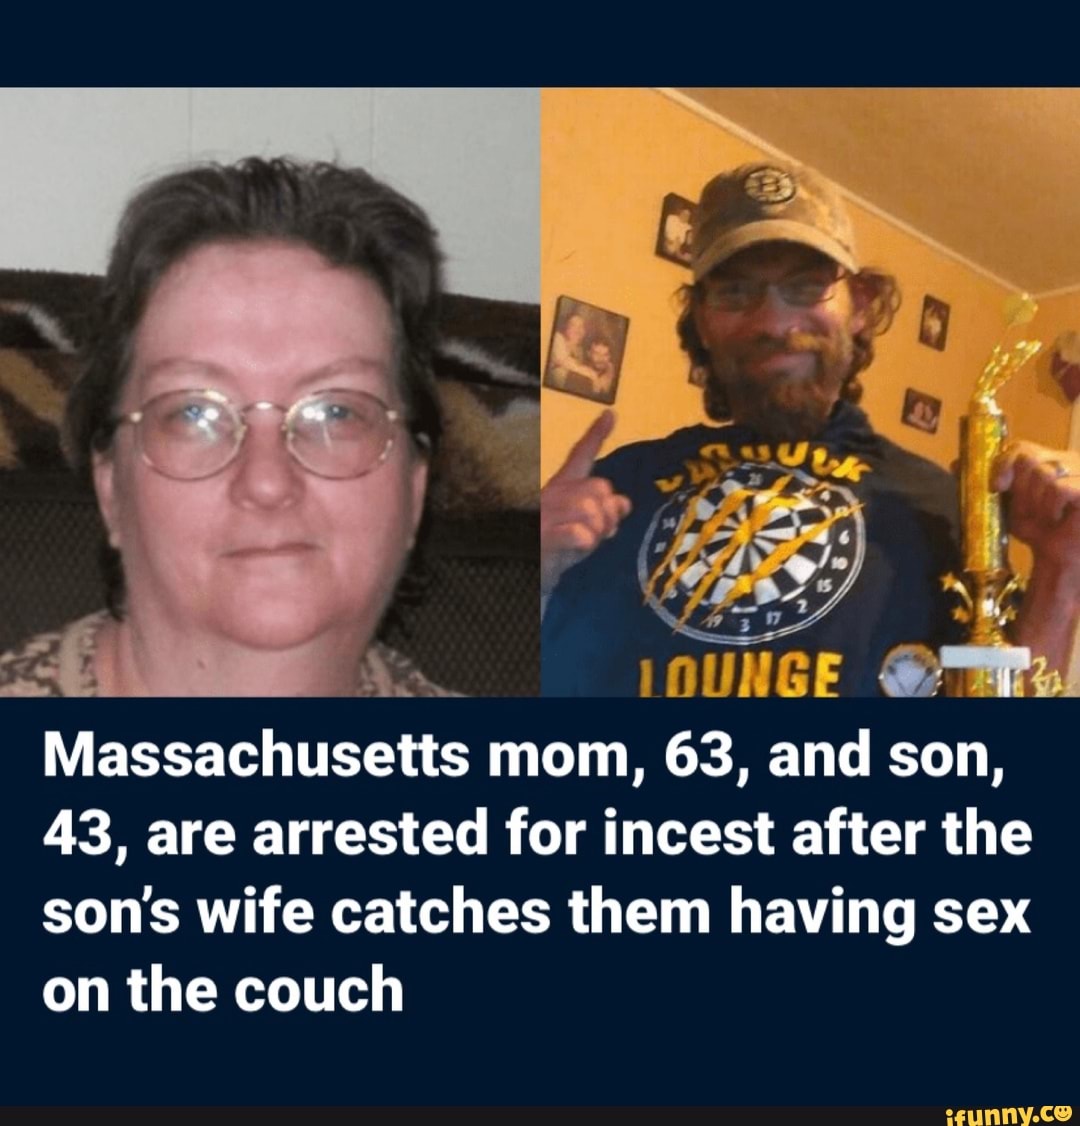 Massachusetts mom, 63, and son, 43, are arrested for incest after the sons wife catches them having sex on the couch pic